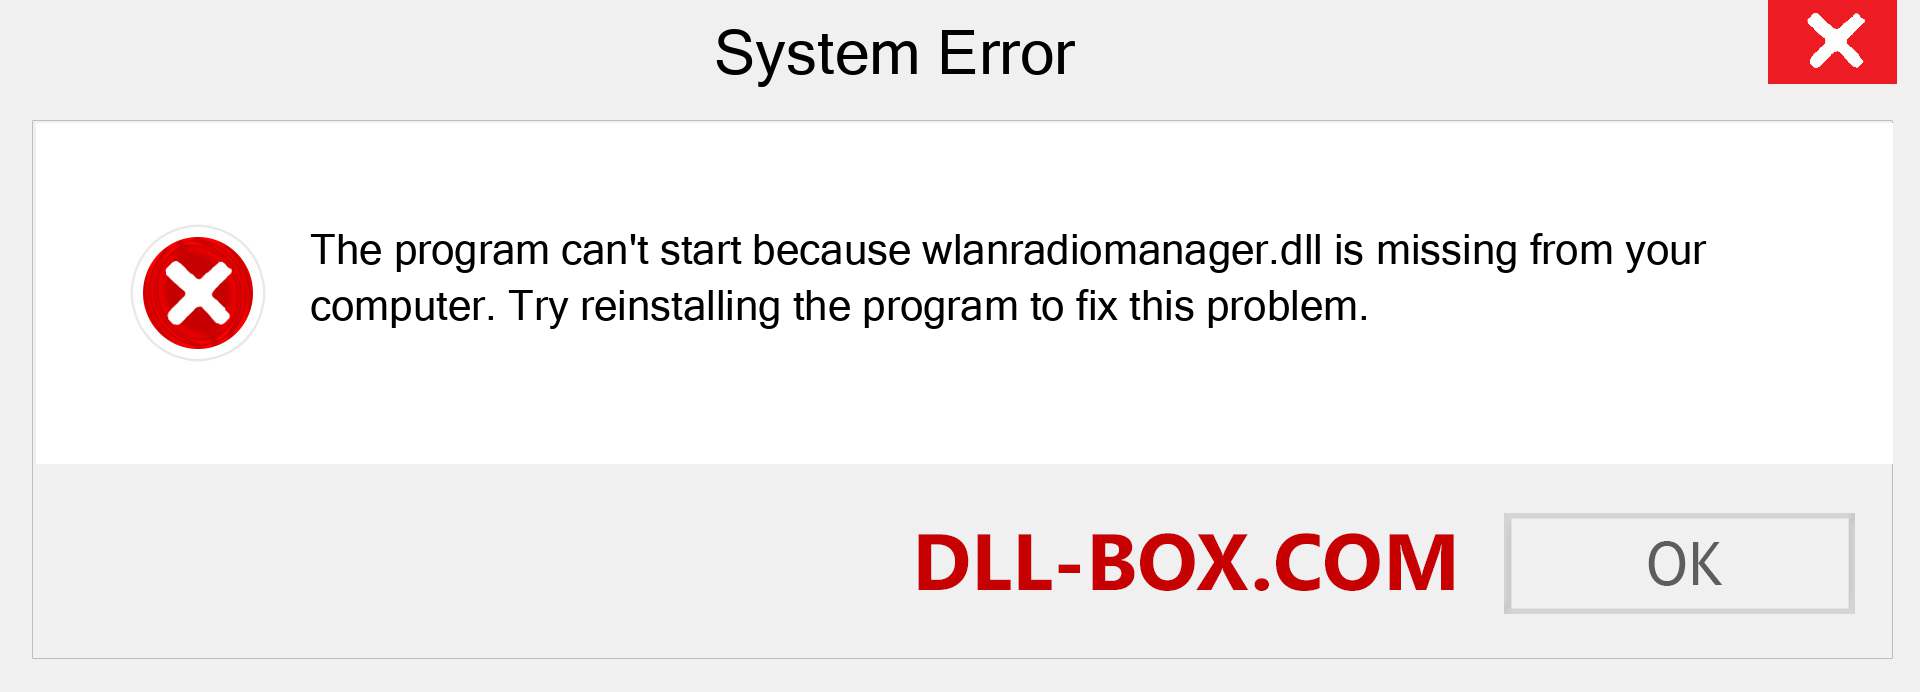  wlanradiomanager.dll file is missing?. Download for Windows 7, 8, 10 - Fix  wlanradiomanager dll Missing Error on Windows, photos, images